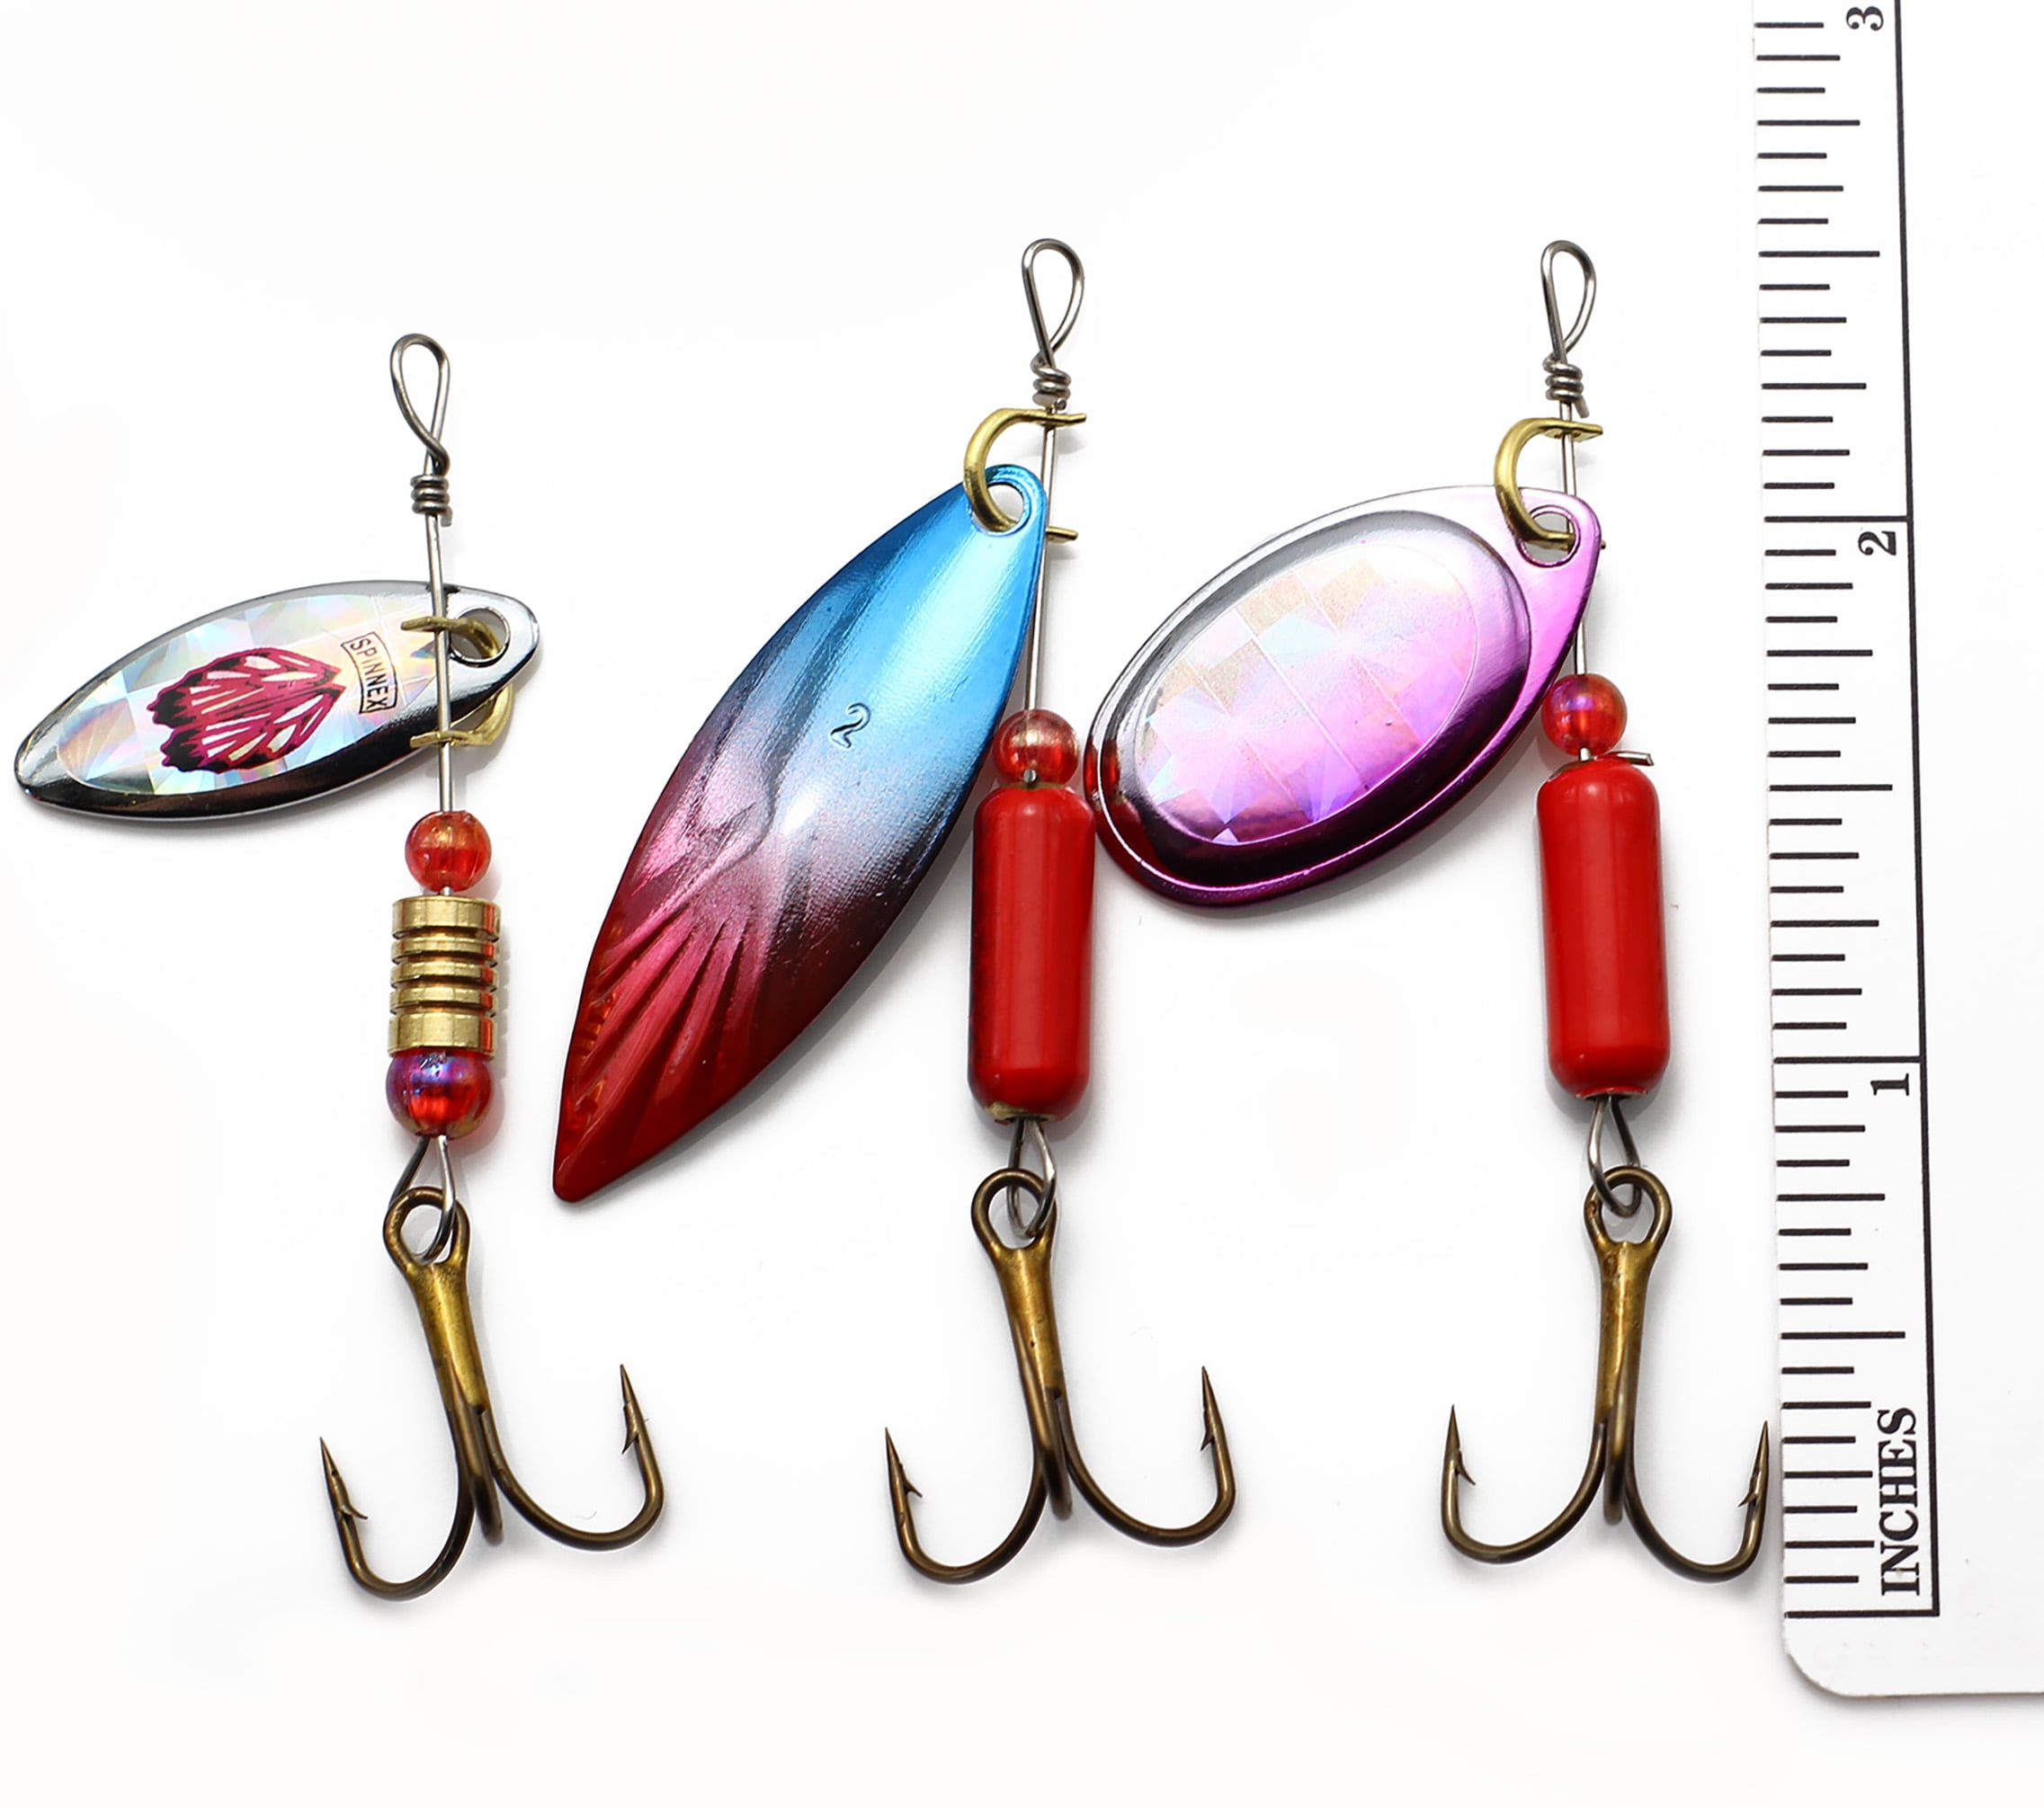 Fishing Lors. $100 for the whole lot ￼ - Hard Baits